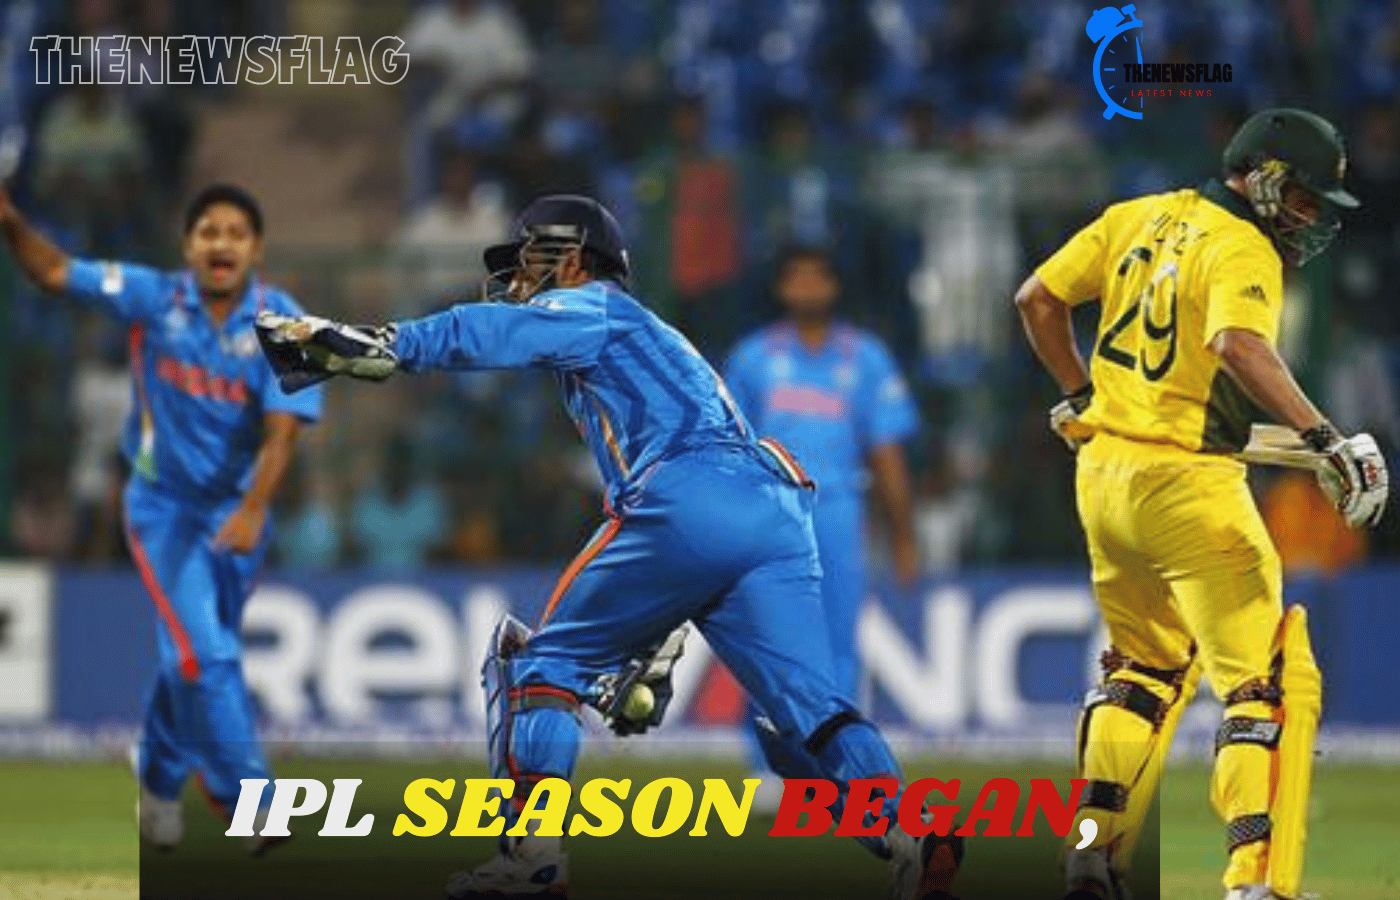 Even before the IPL season began, CSK faced a significant setback.